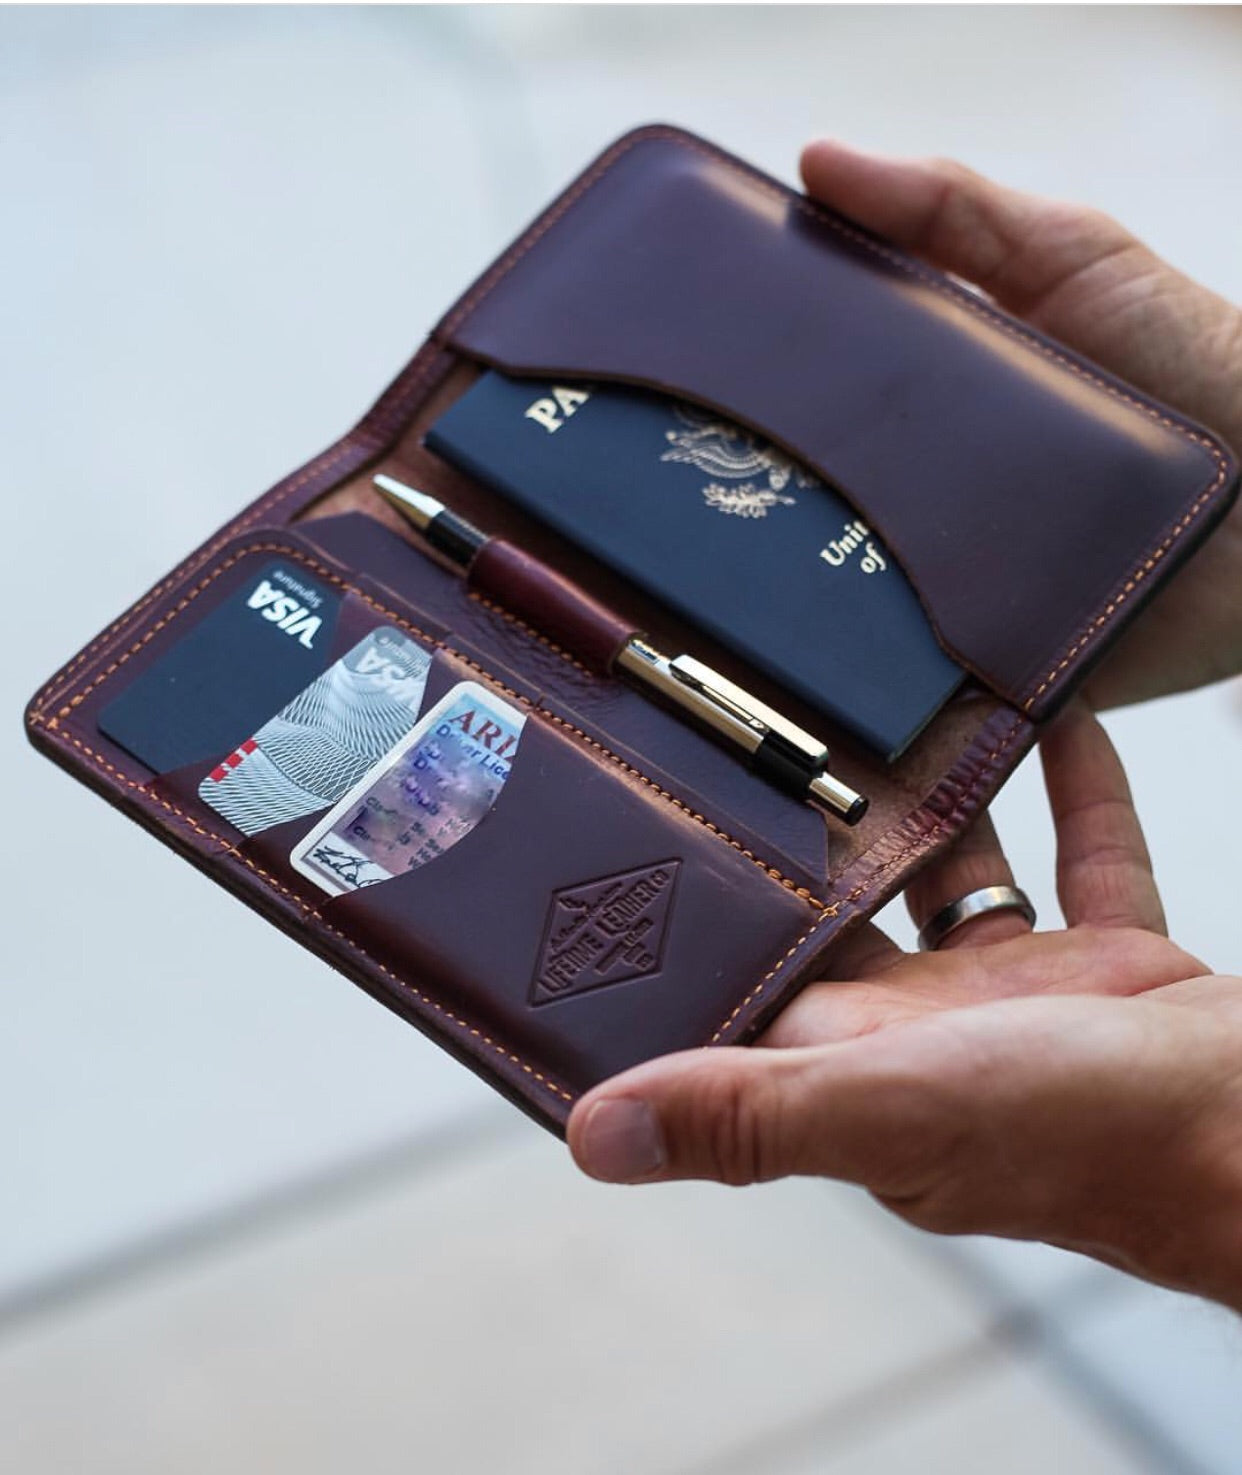 Field Notes/Passport Wallet Plain- Without Personalization